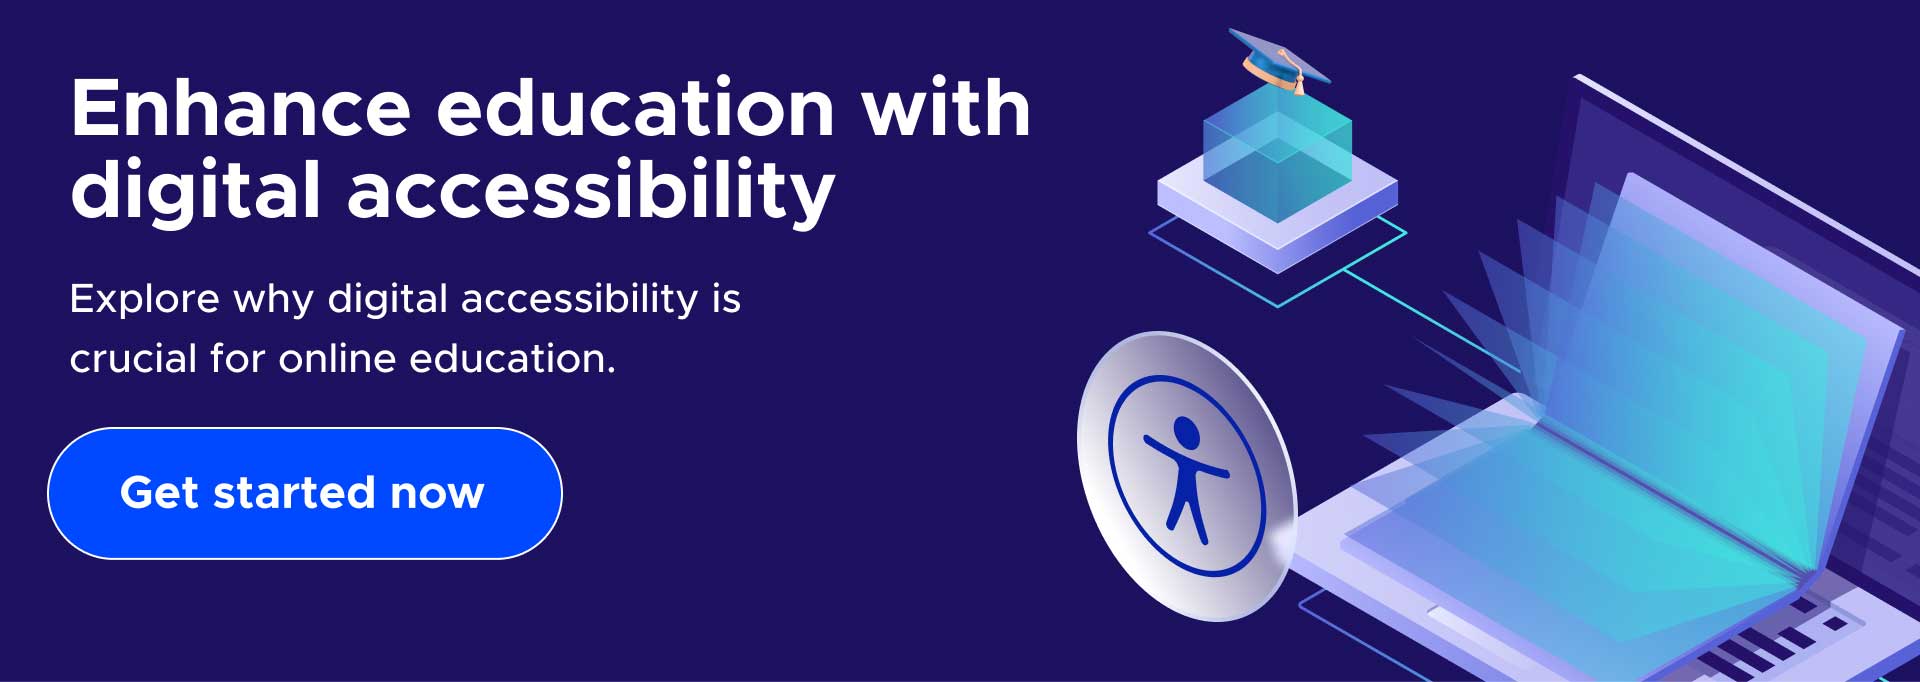 Explore why digital accessibility is crucial for online education. 